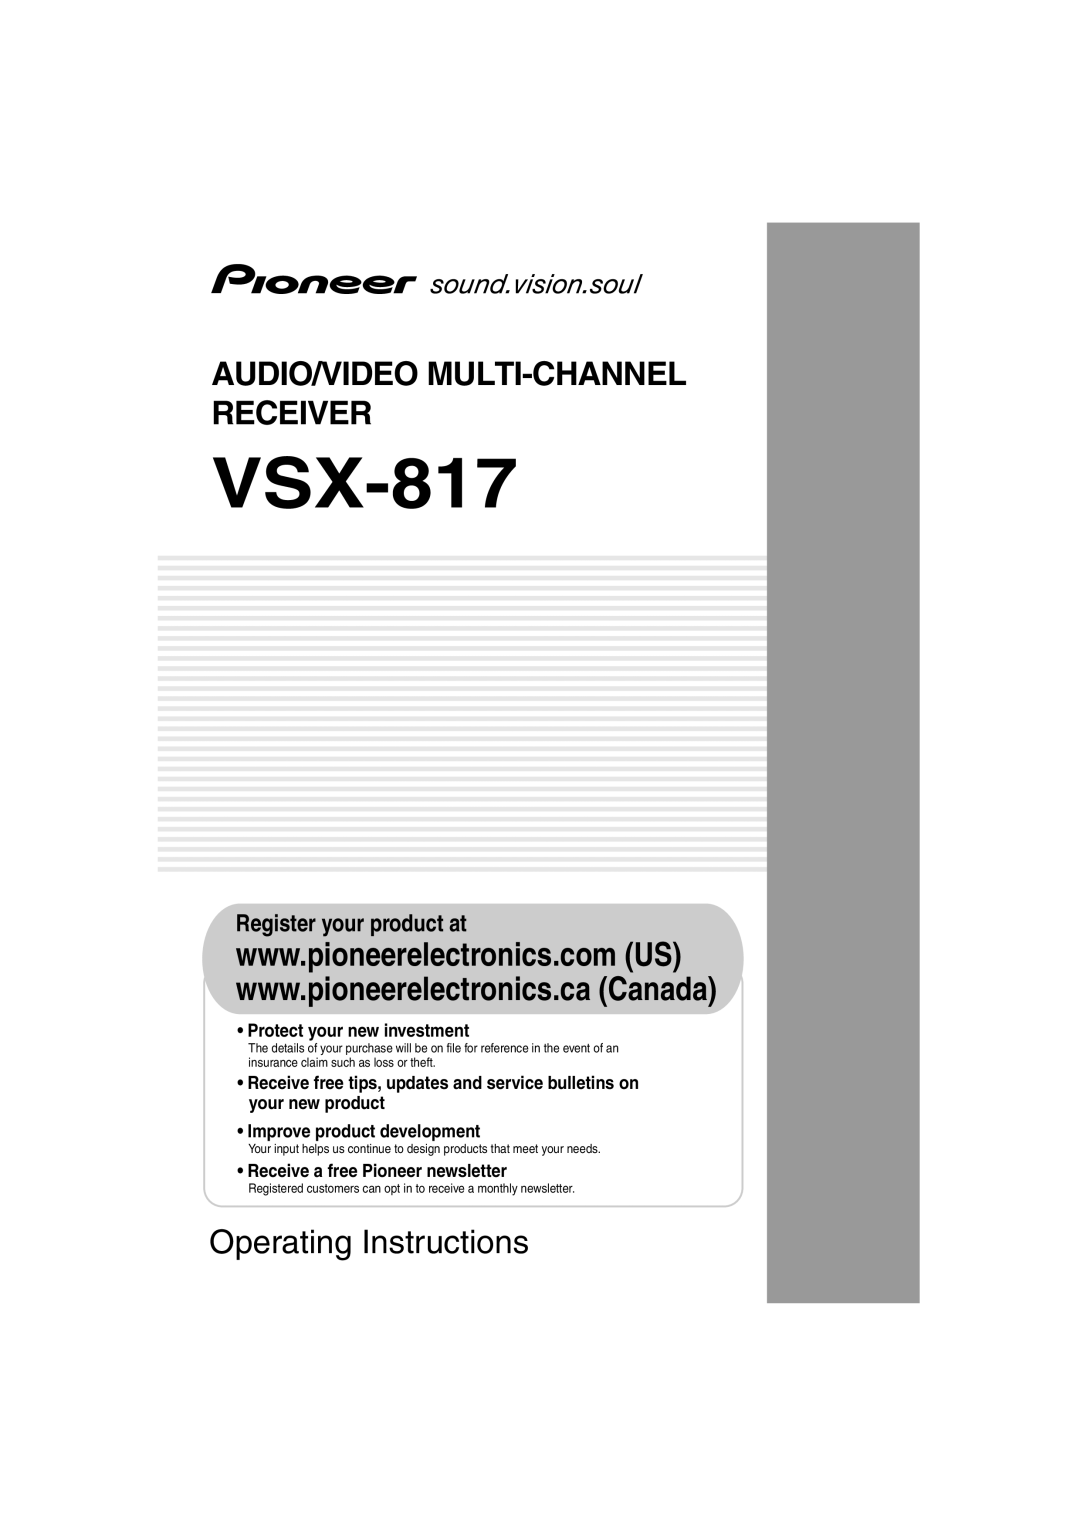 Pioneer VSX-817-S/-K operating instructions Audio/Video Multi-Channel Receiver, Operating Instructions 